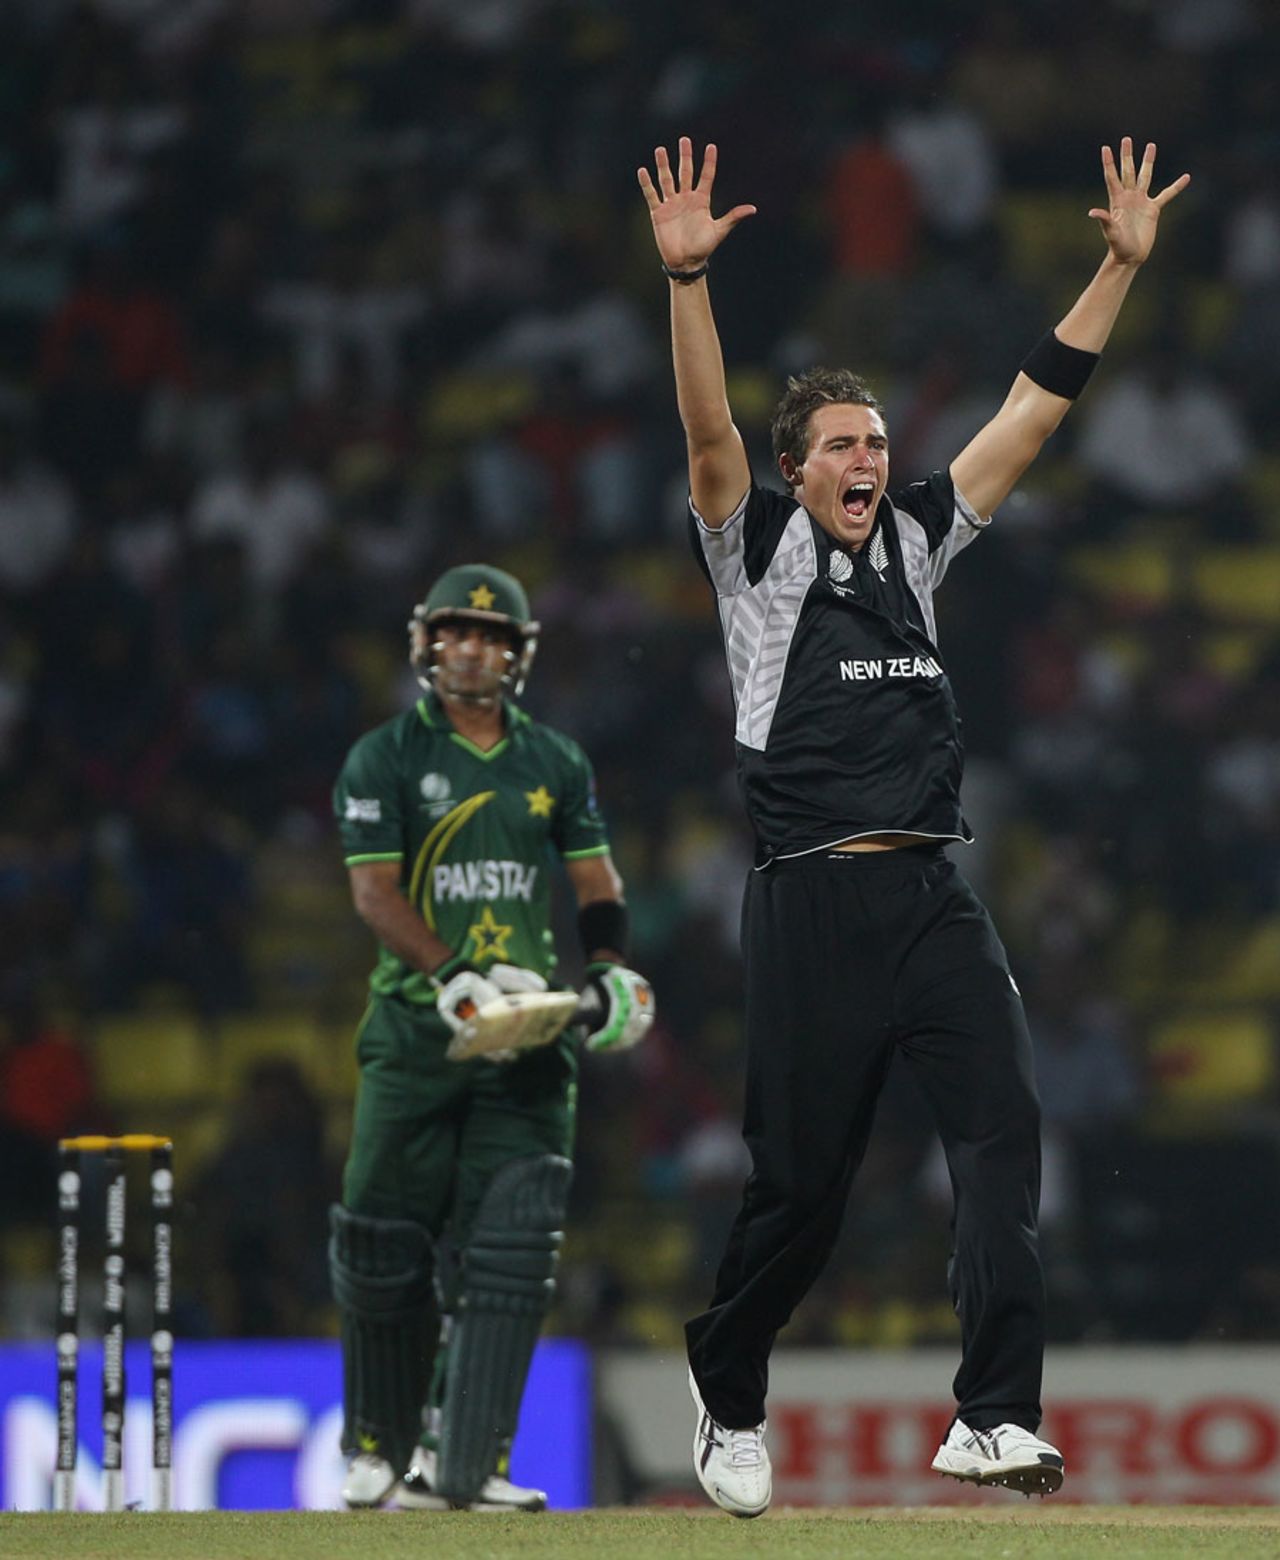 Tim Southee gets Mohammad Hafeez cheaply, New Zealand v Pakistan, Group A, World Cup, Pallekele, March 8, 2011